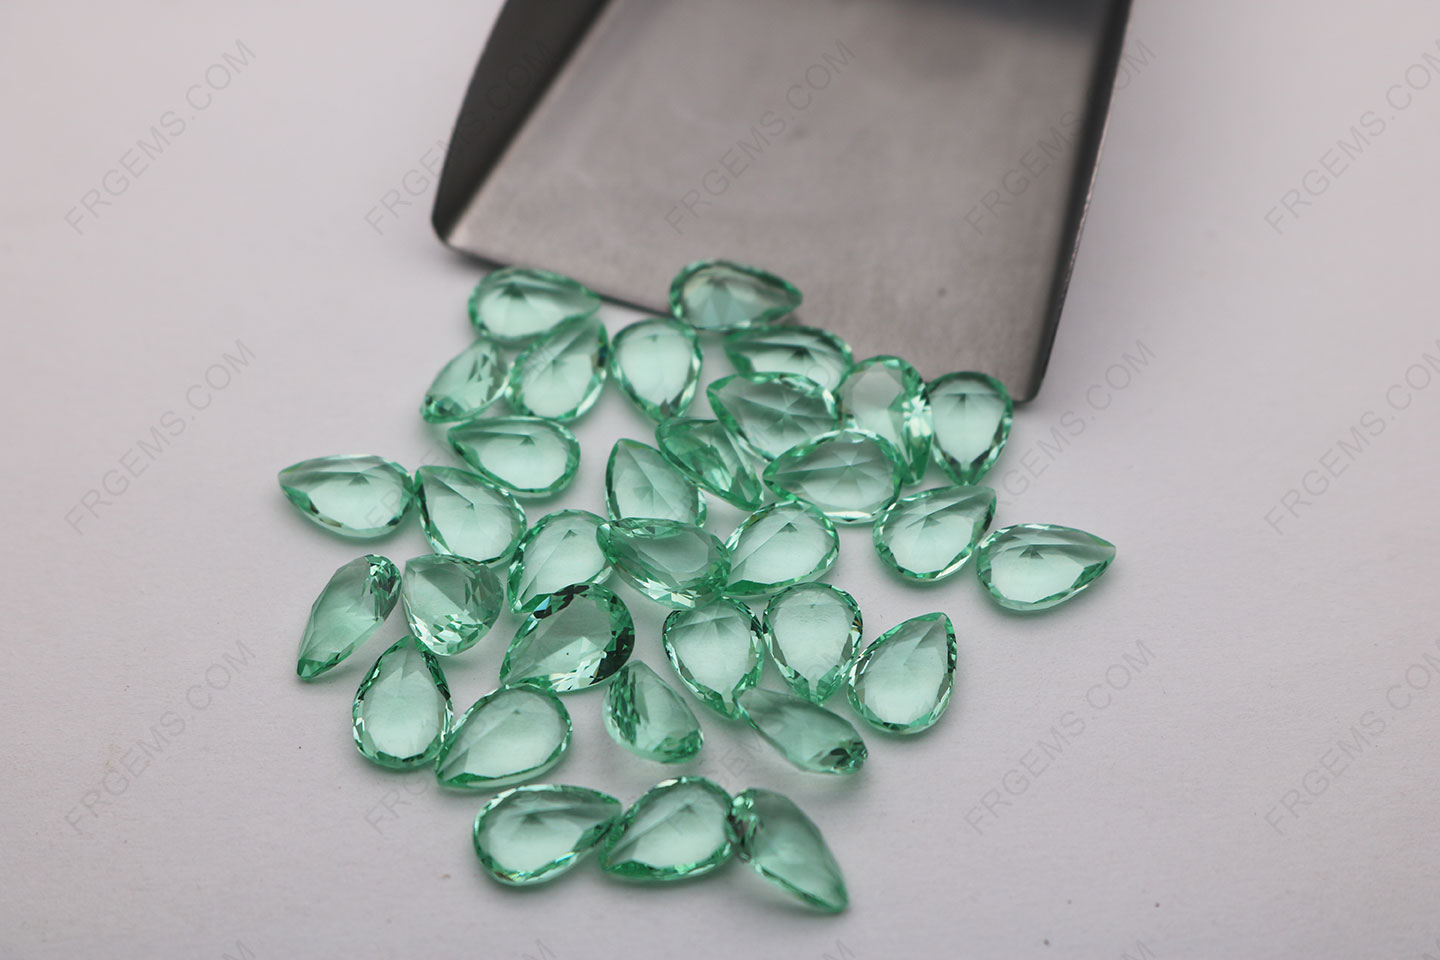 Loose Glass Mint Green Tourmaline BE08# color Pear faceted 10x7mm gemstones wholesale from China factory